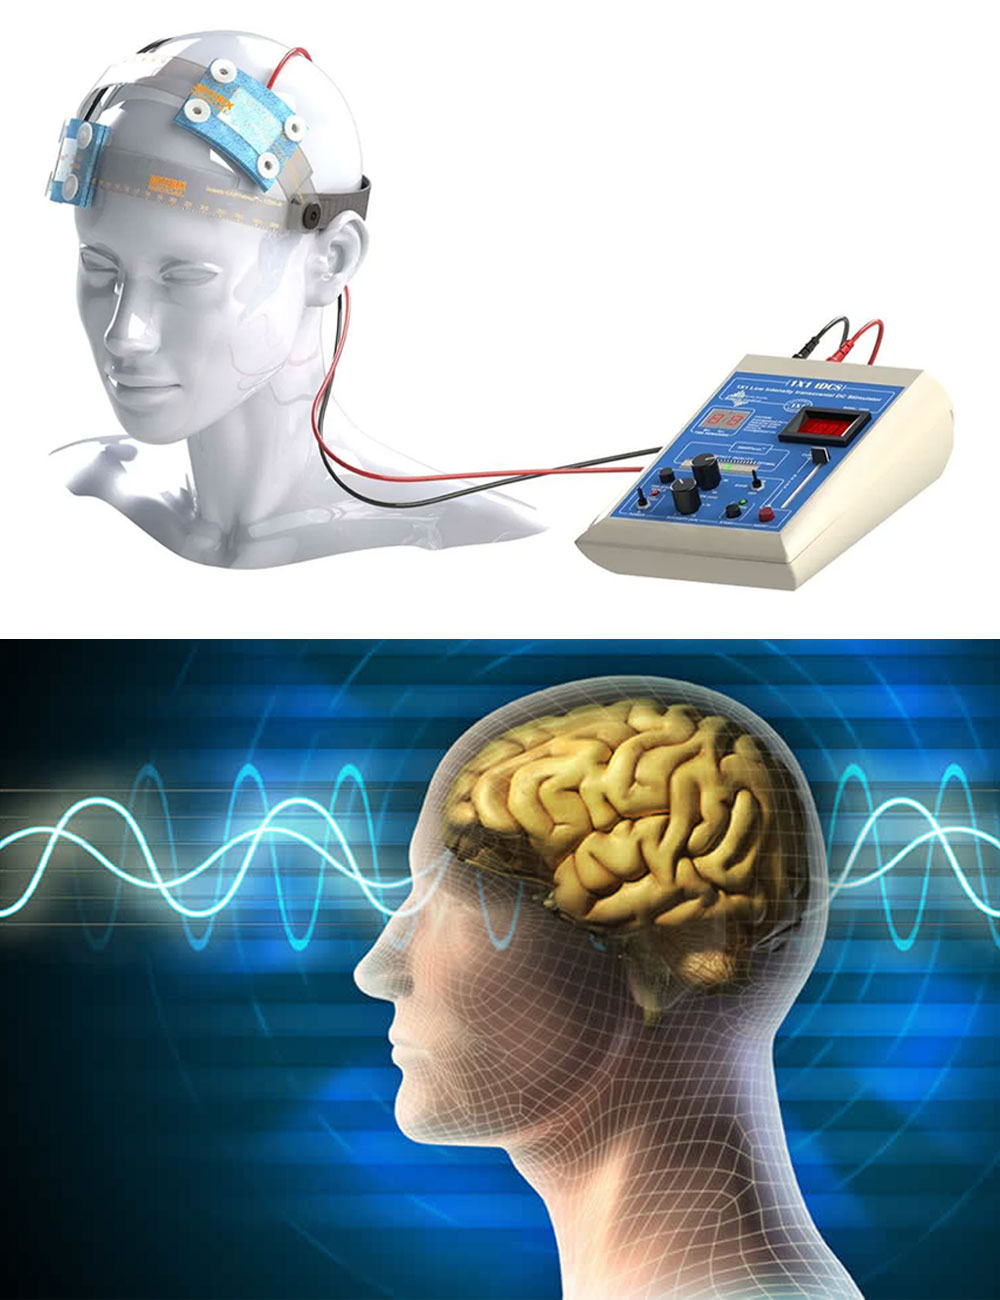 Transcranial Direct Current Stimulation (tDCS) Therapy